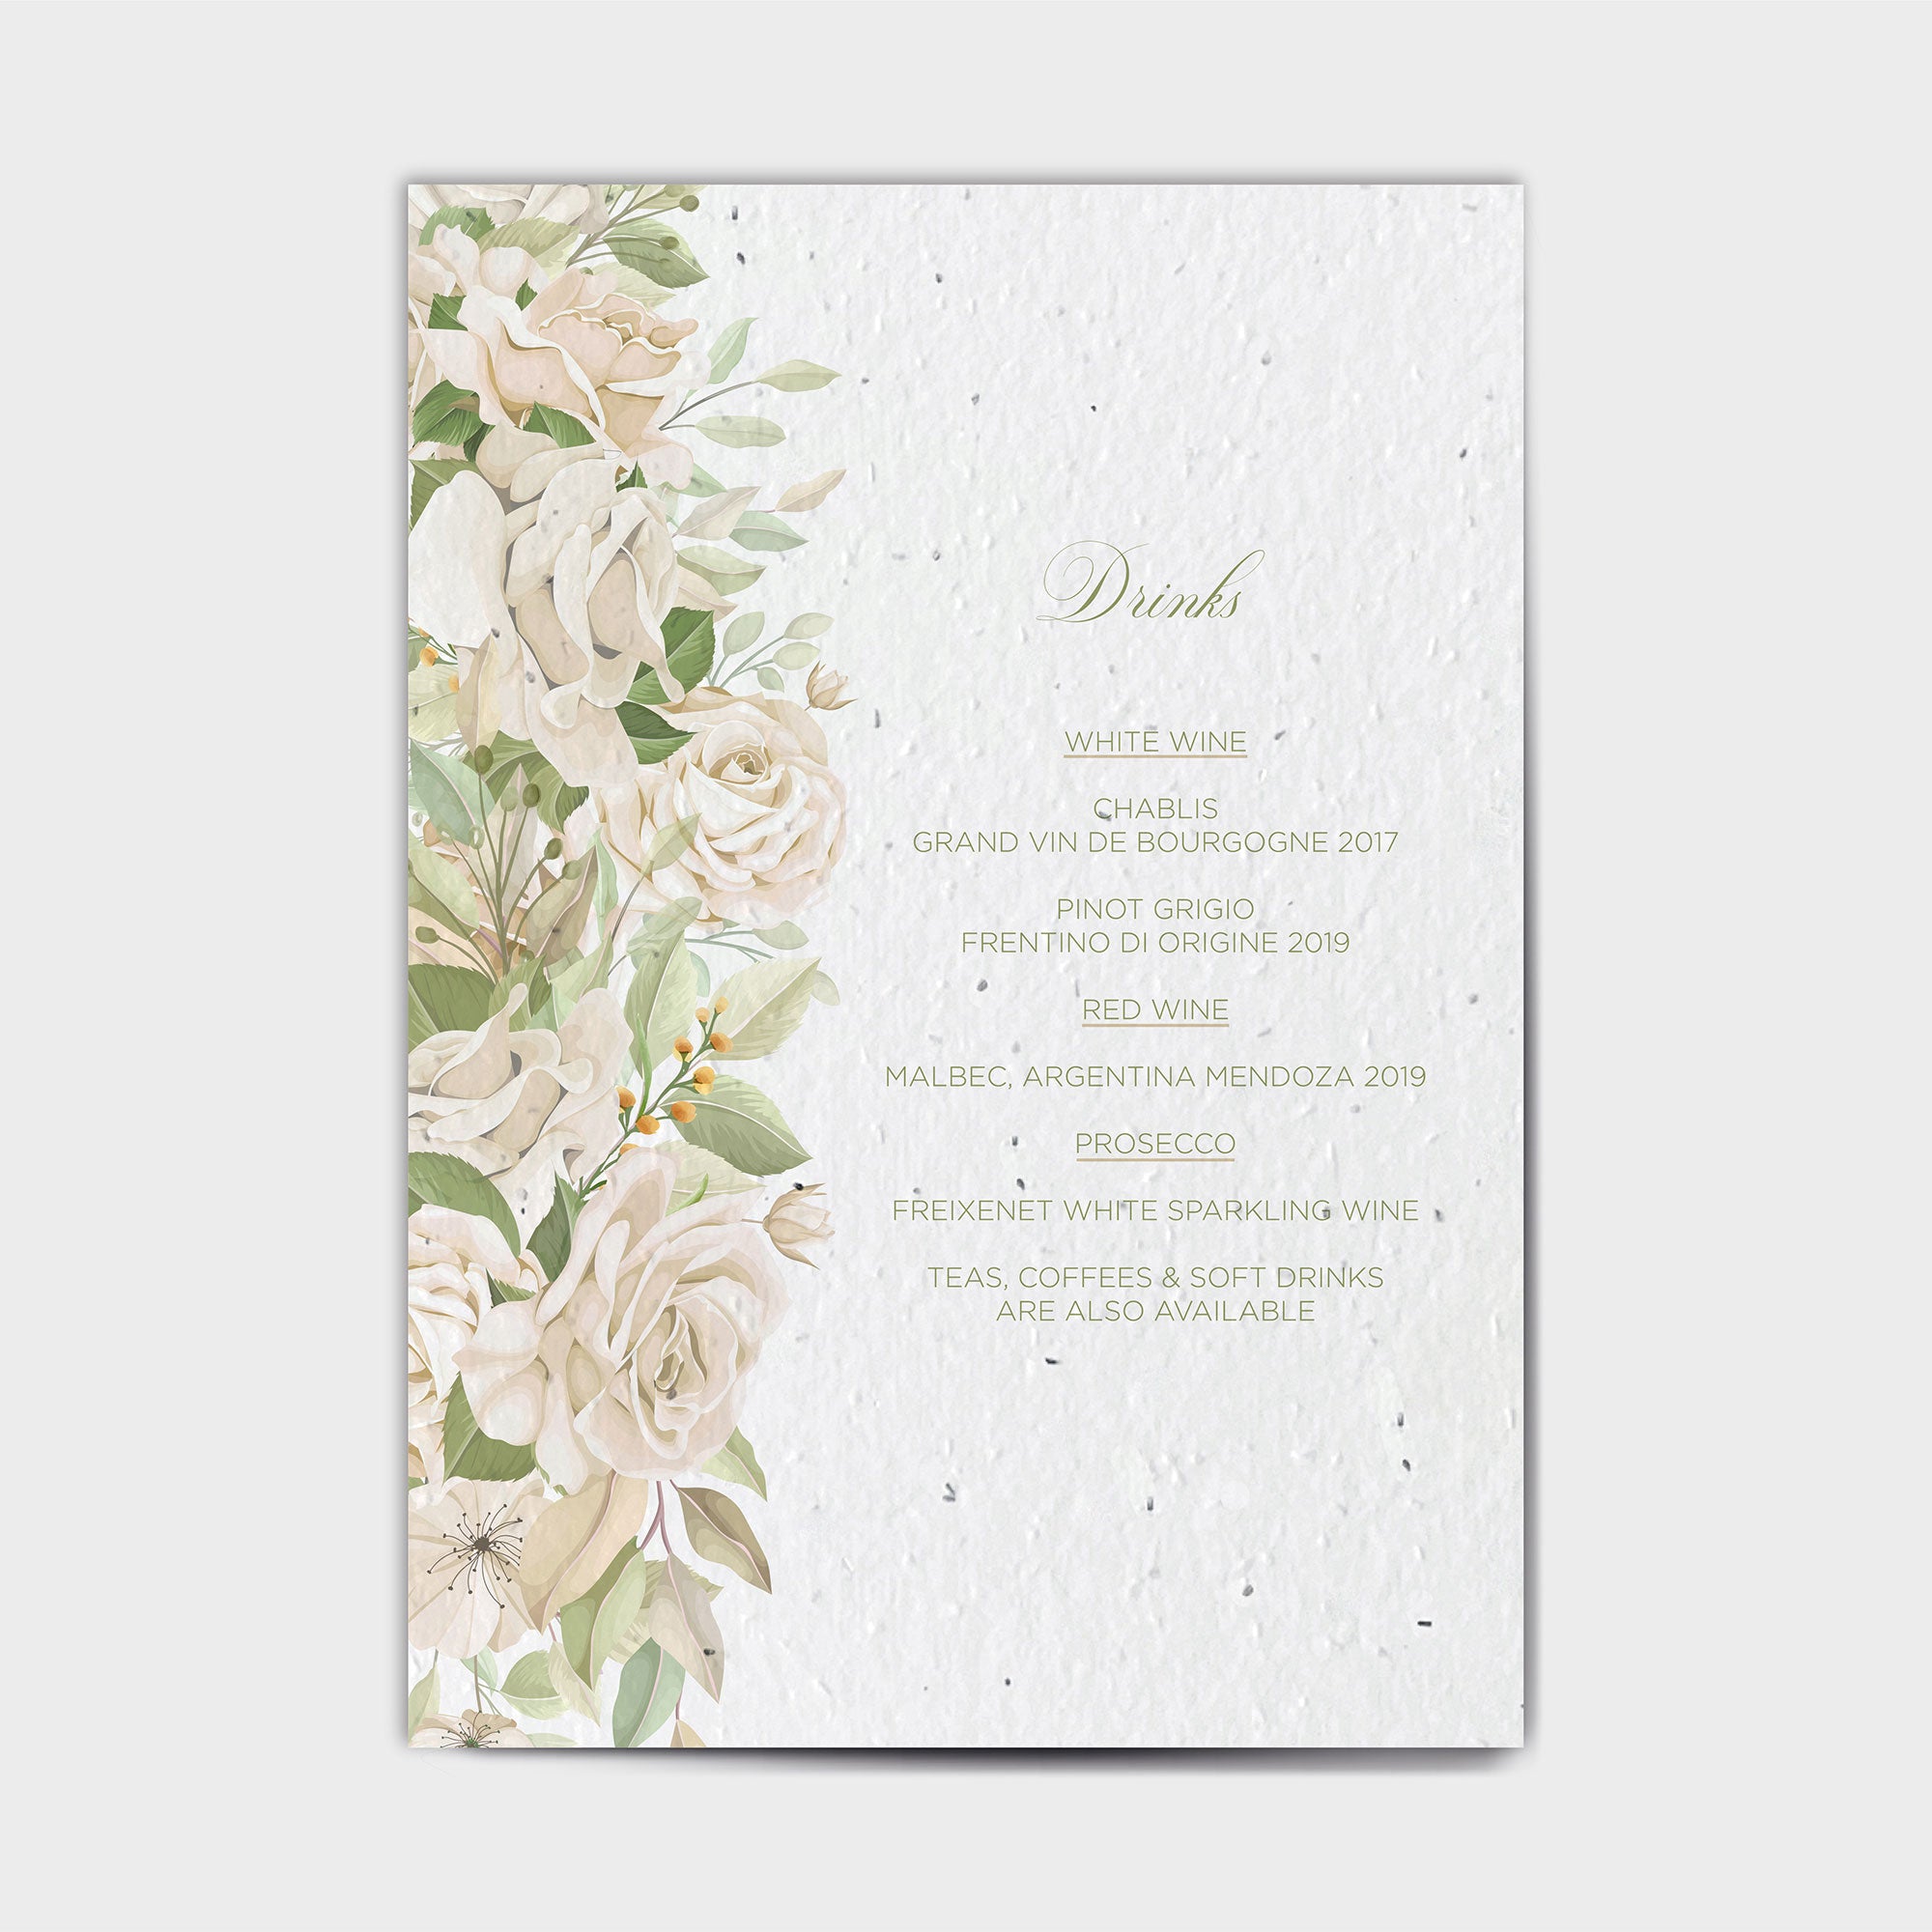 Shop online Ivory Bouquet - 100% biodegradable seed-embedded cards Shop -The Seed Card Company